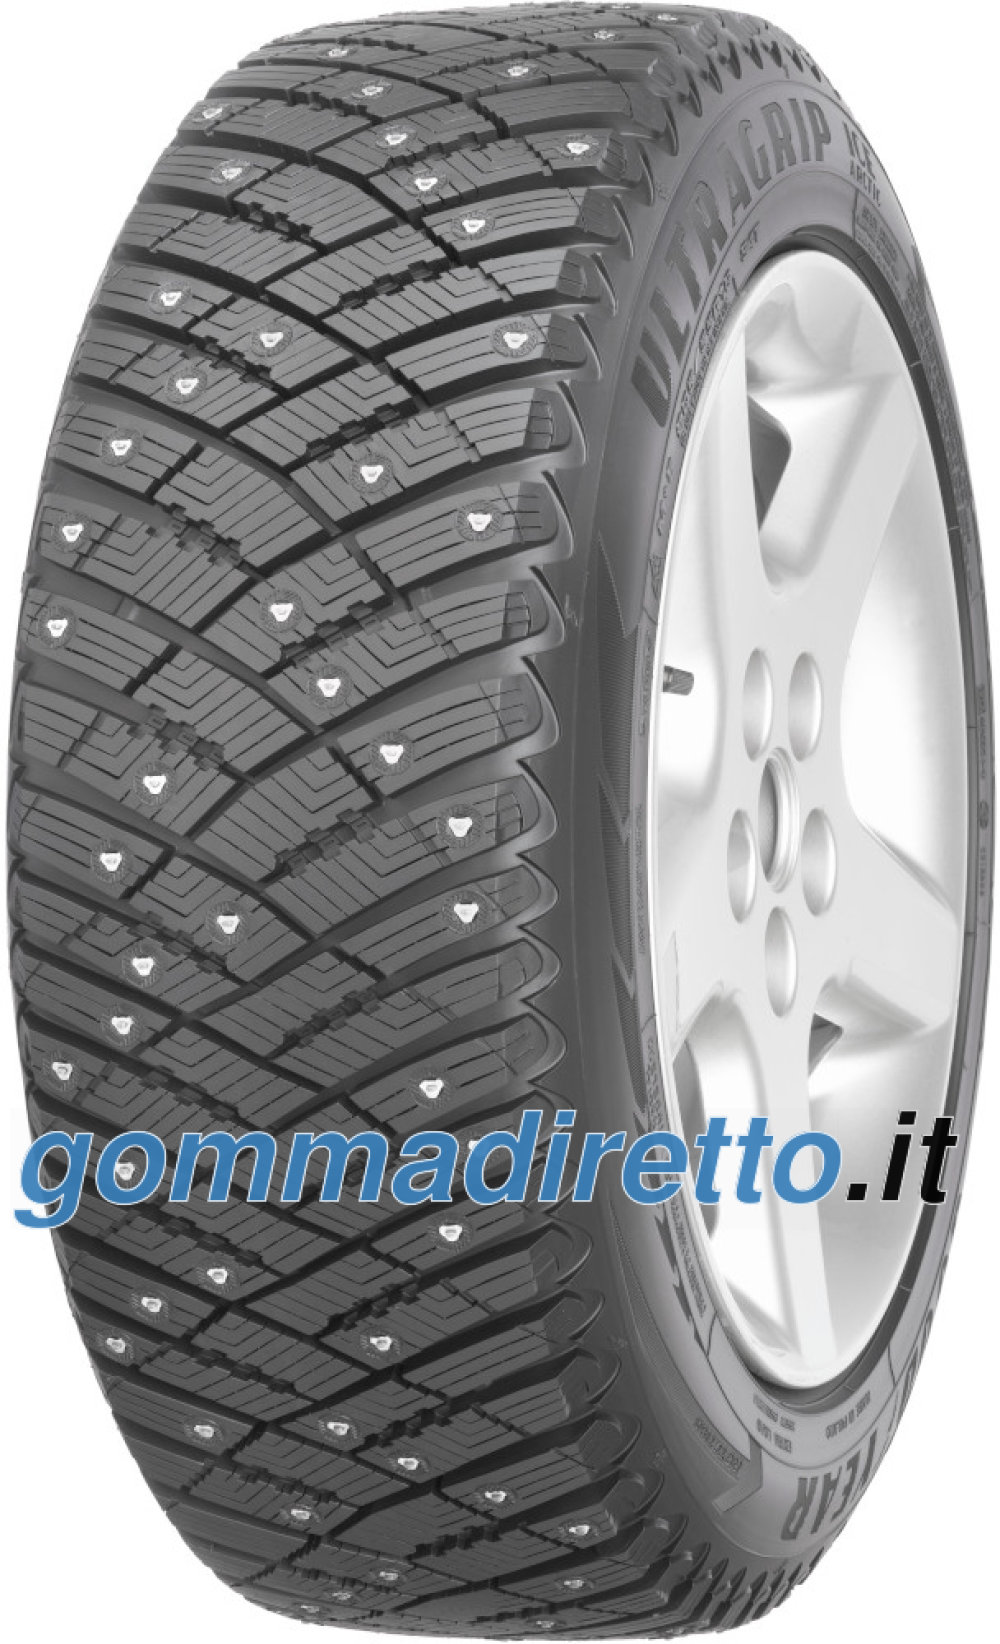 Image of Goodyear Ultra Grip Ice Arctic ( 175/70 R14 88T XL, pneumatico chiodato )